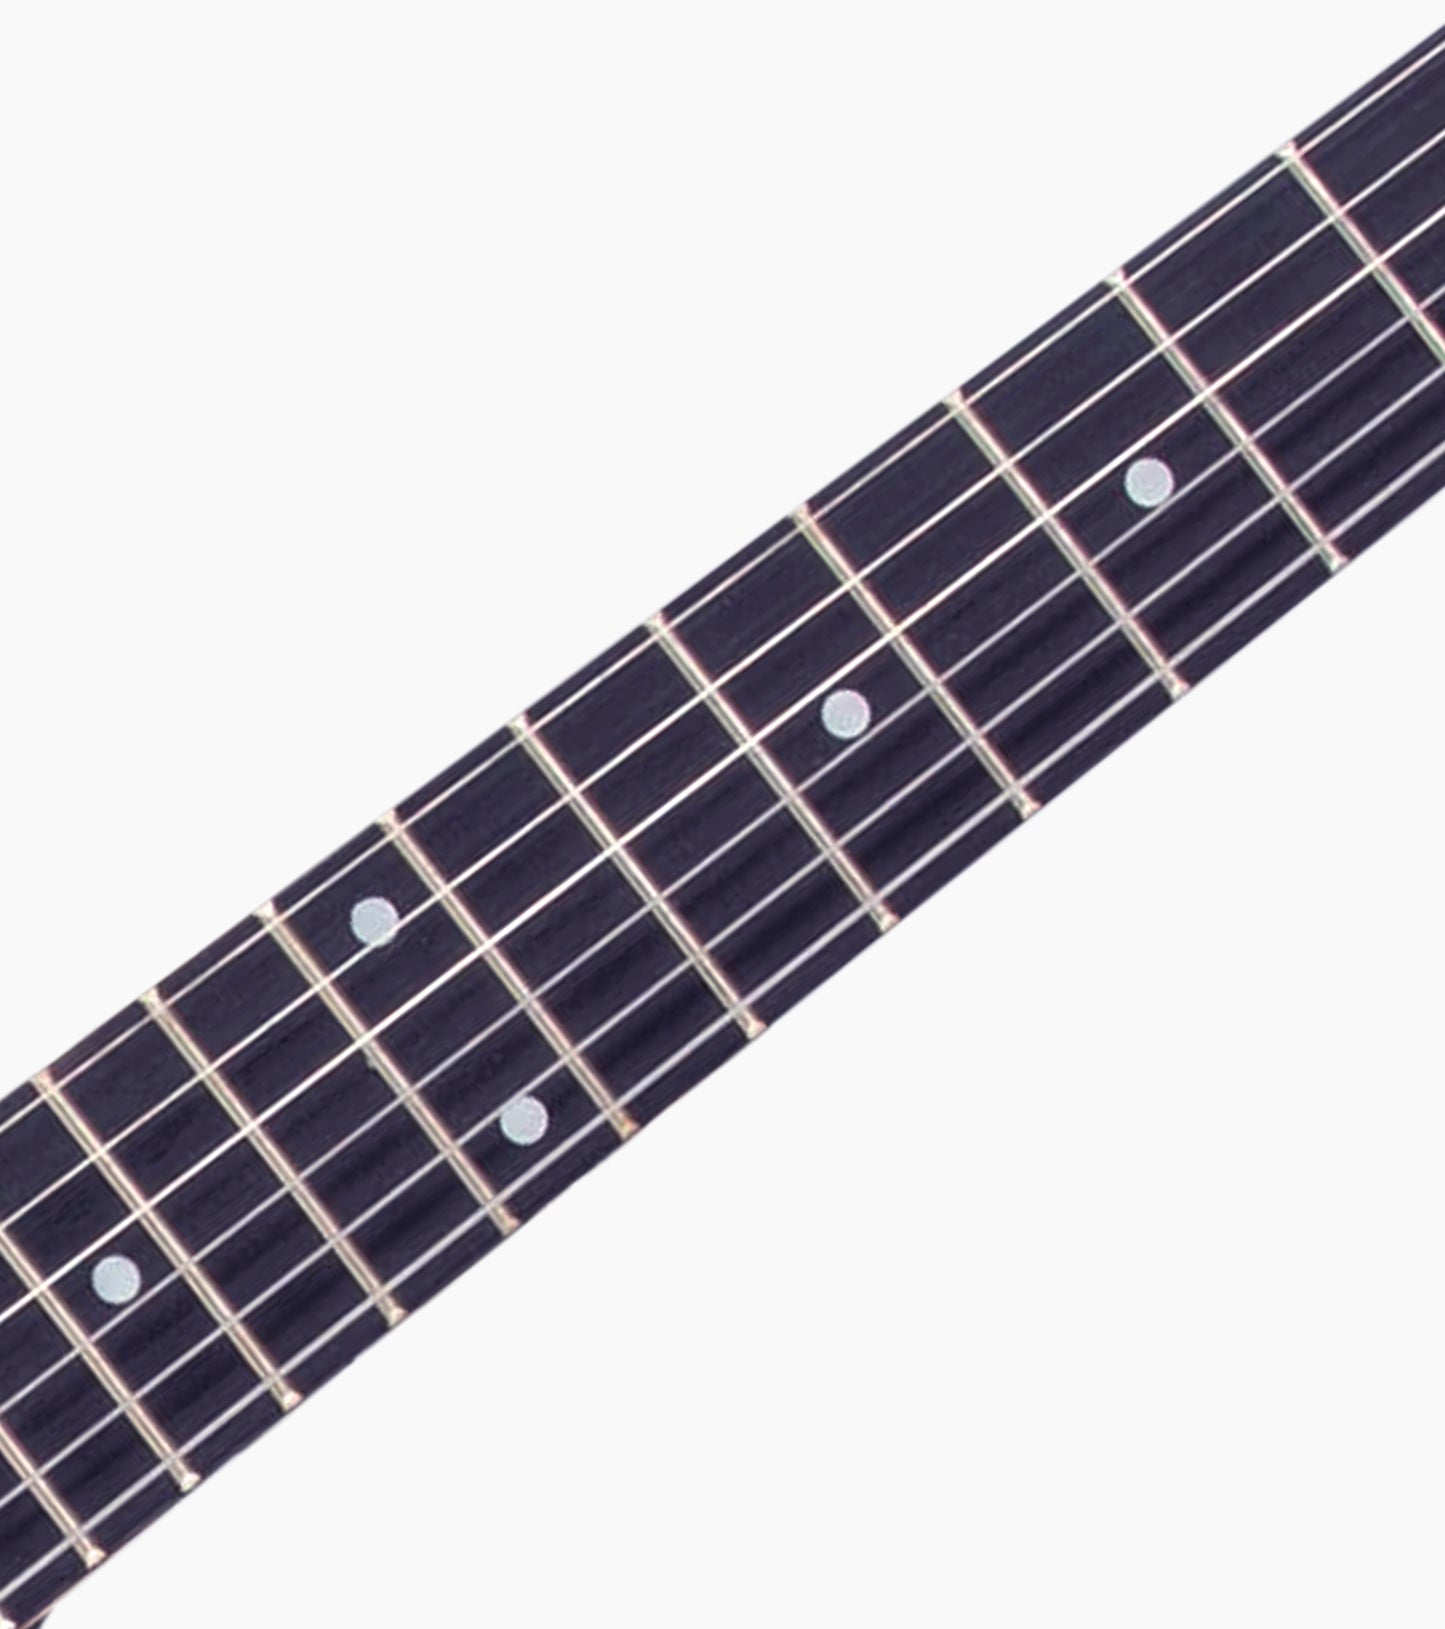 close-up of Natural double-cutaway beginner electric guitar fretboard